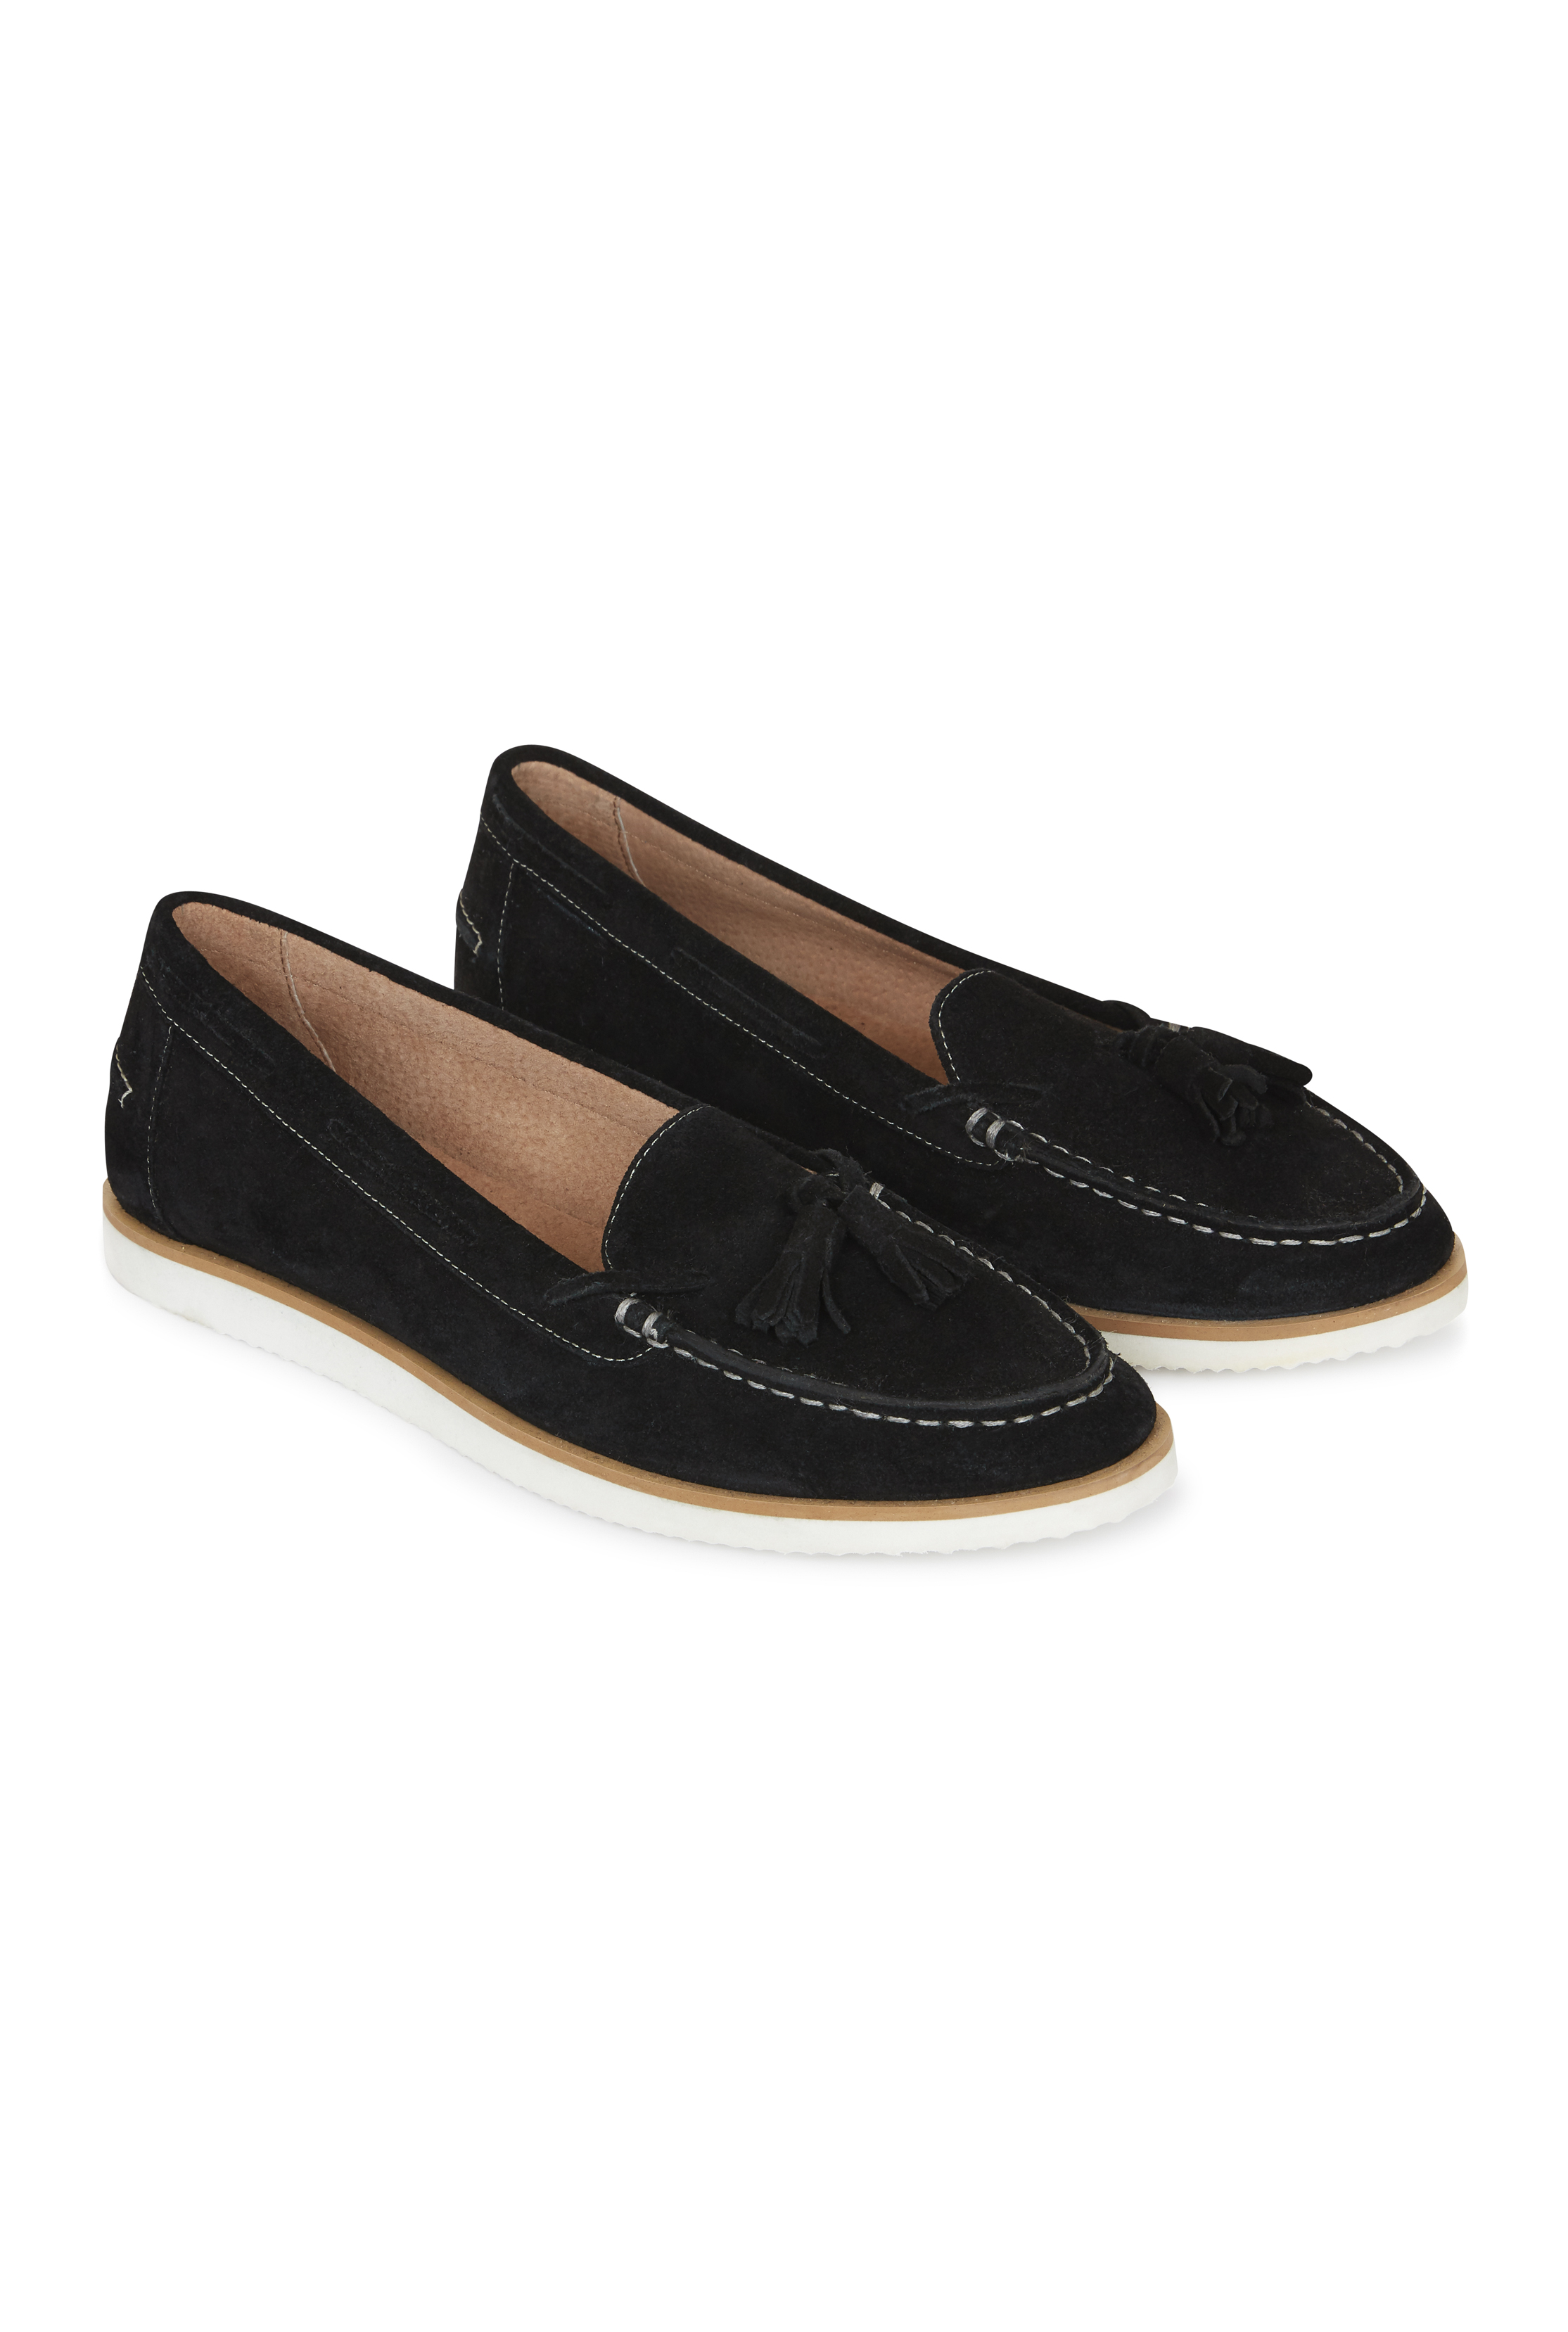 LTS Rudy Suede Moccasin Tassel Loafer | Long Tall Sally